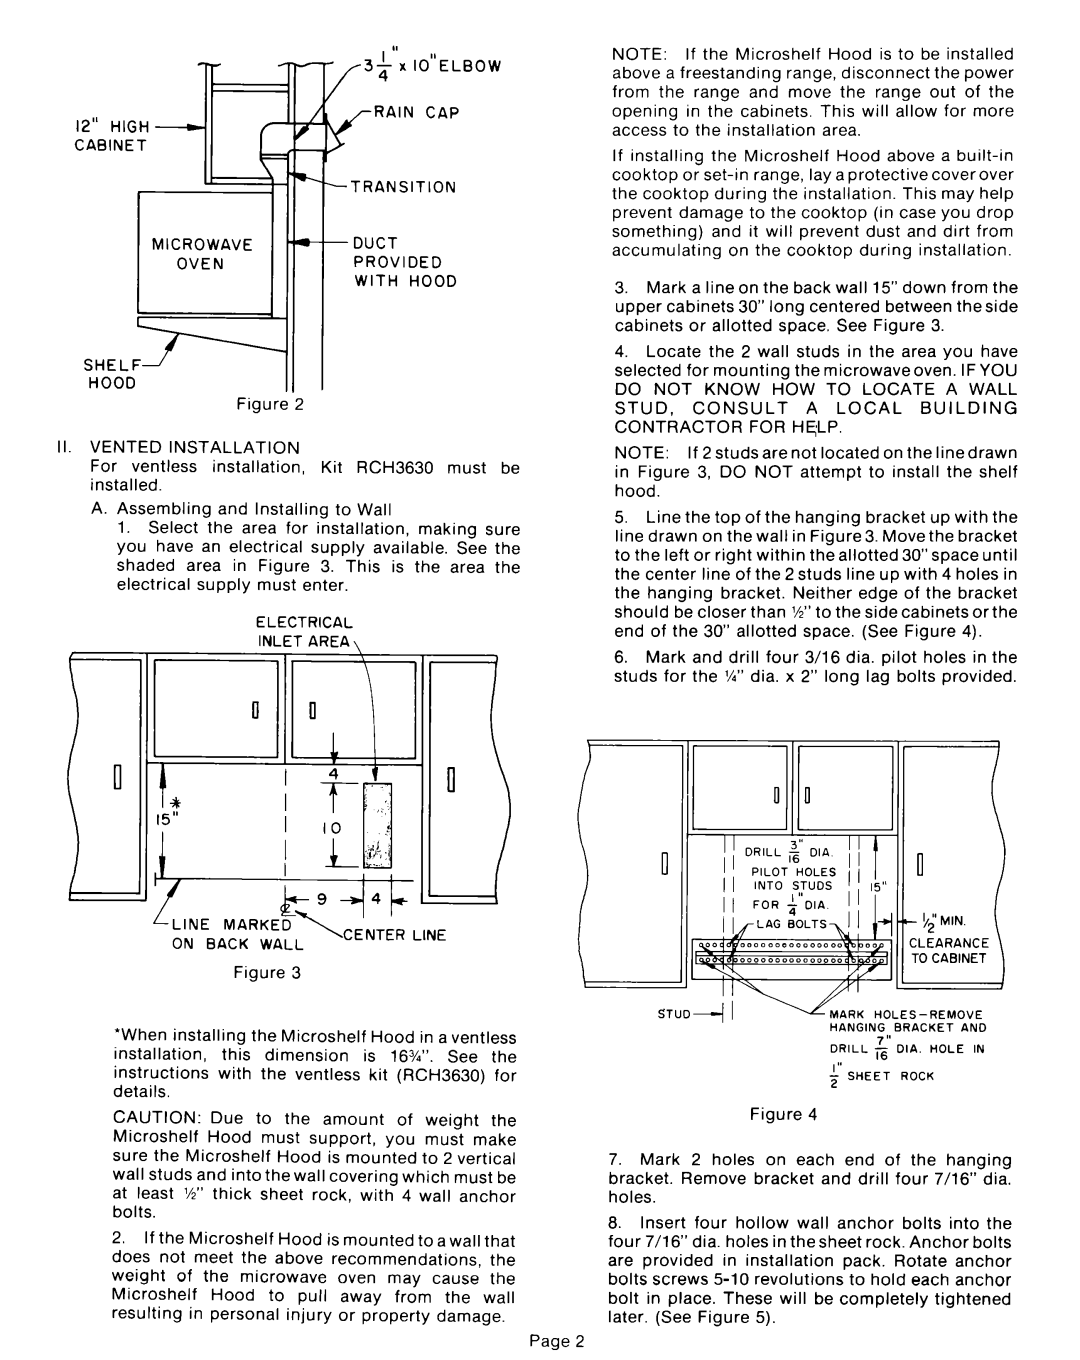 Whirlpool RJH 3330-1 operating instructions Ii. Vented Installation 